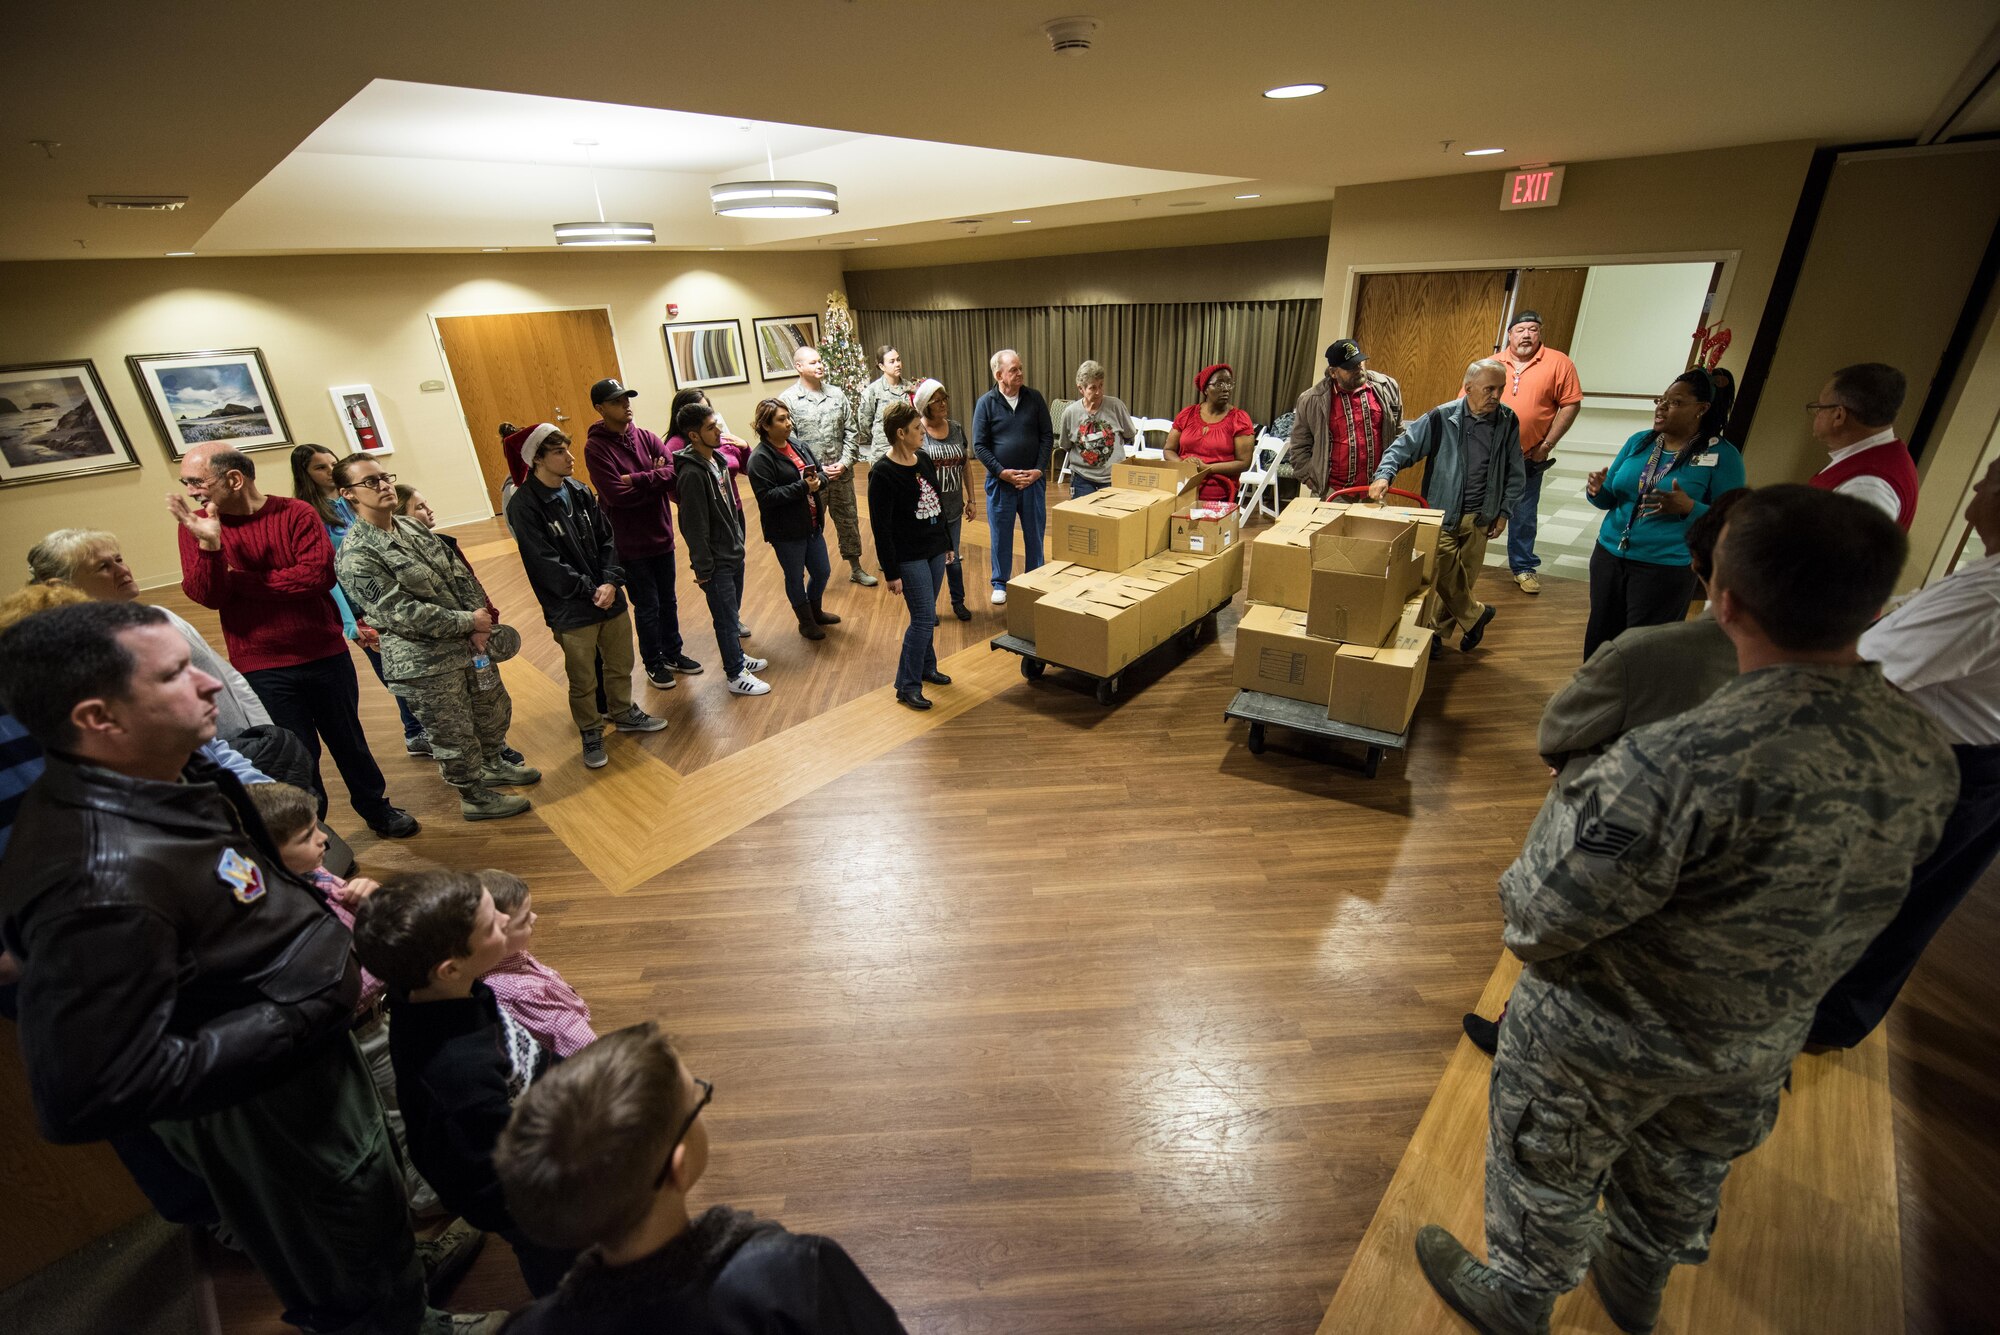 Members of Seymour Johnson Air Force Base, North Carolina, the Goldsboro Elks Lodge #139, and the local Wayne County community receive instructions before visiting with the residents of the N.C. Veterans Home, Dec. 24, 2016, in Kinston, North Carolina. More than 45 people volunteered to pass out goody bags and holiday cards to the veterans. (U.S. Air Force photo by Airman Shawna L. Keyes)